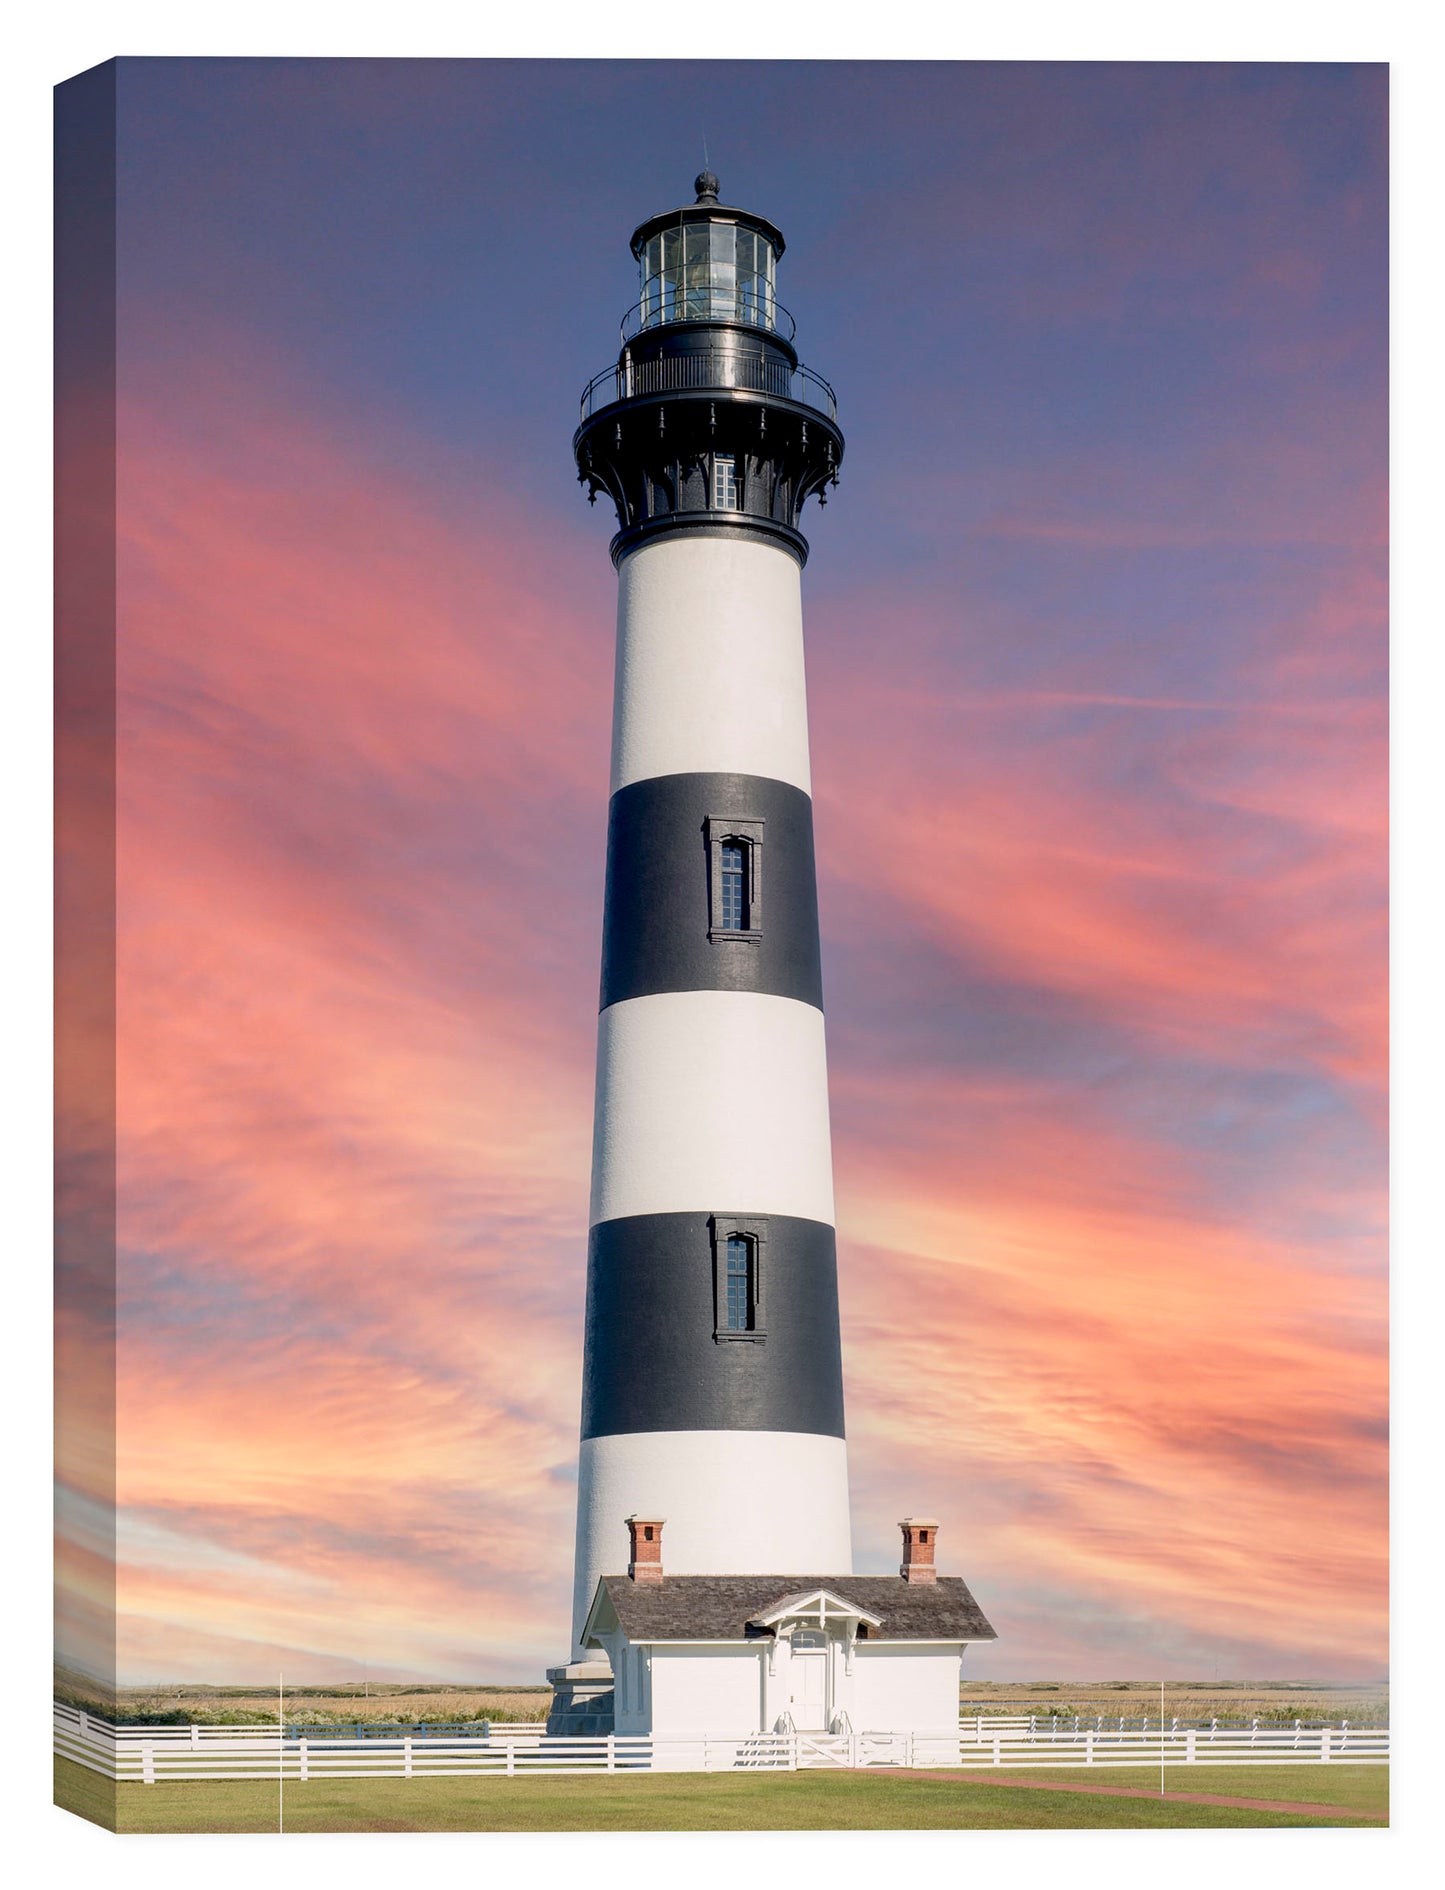 Bodie Island Lighthouse (Cape Hatteras) - Image on Canvas